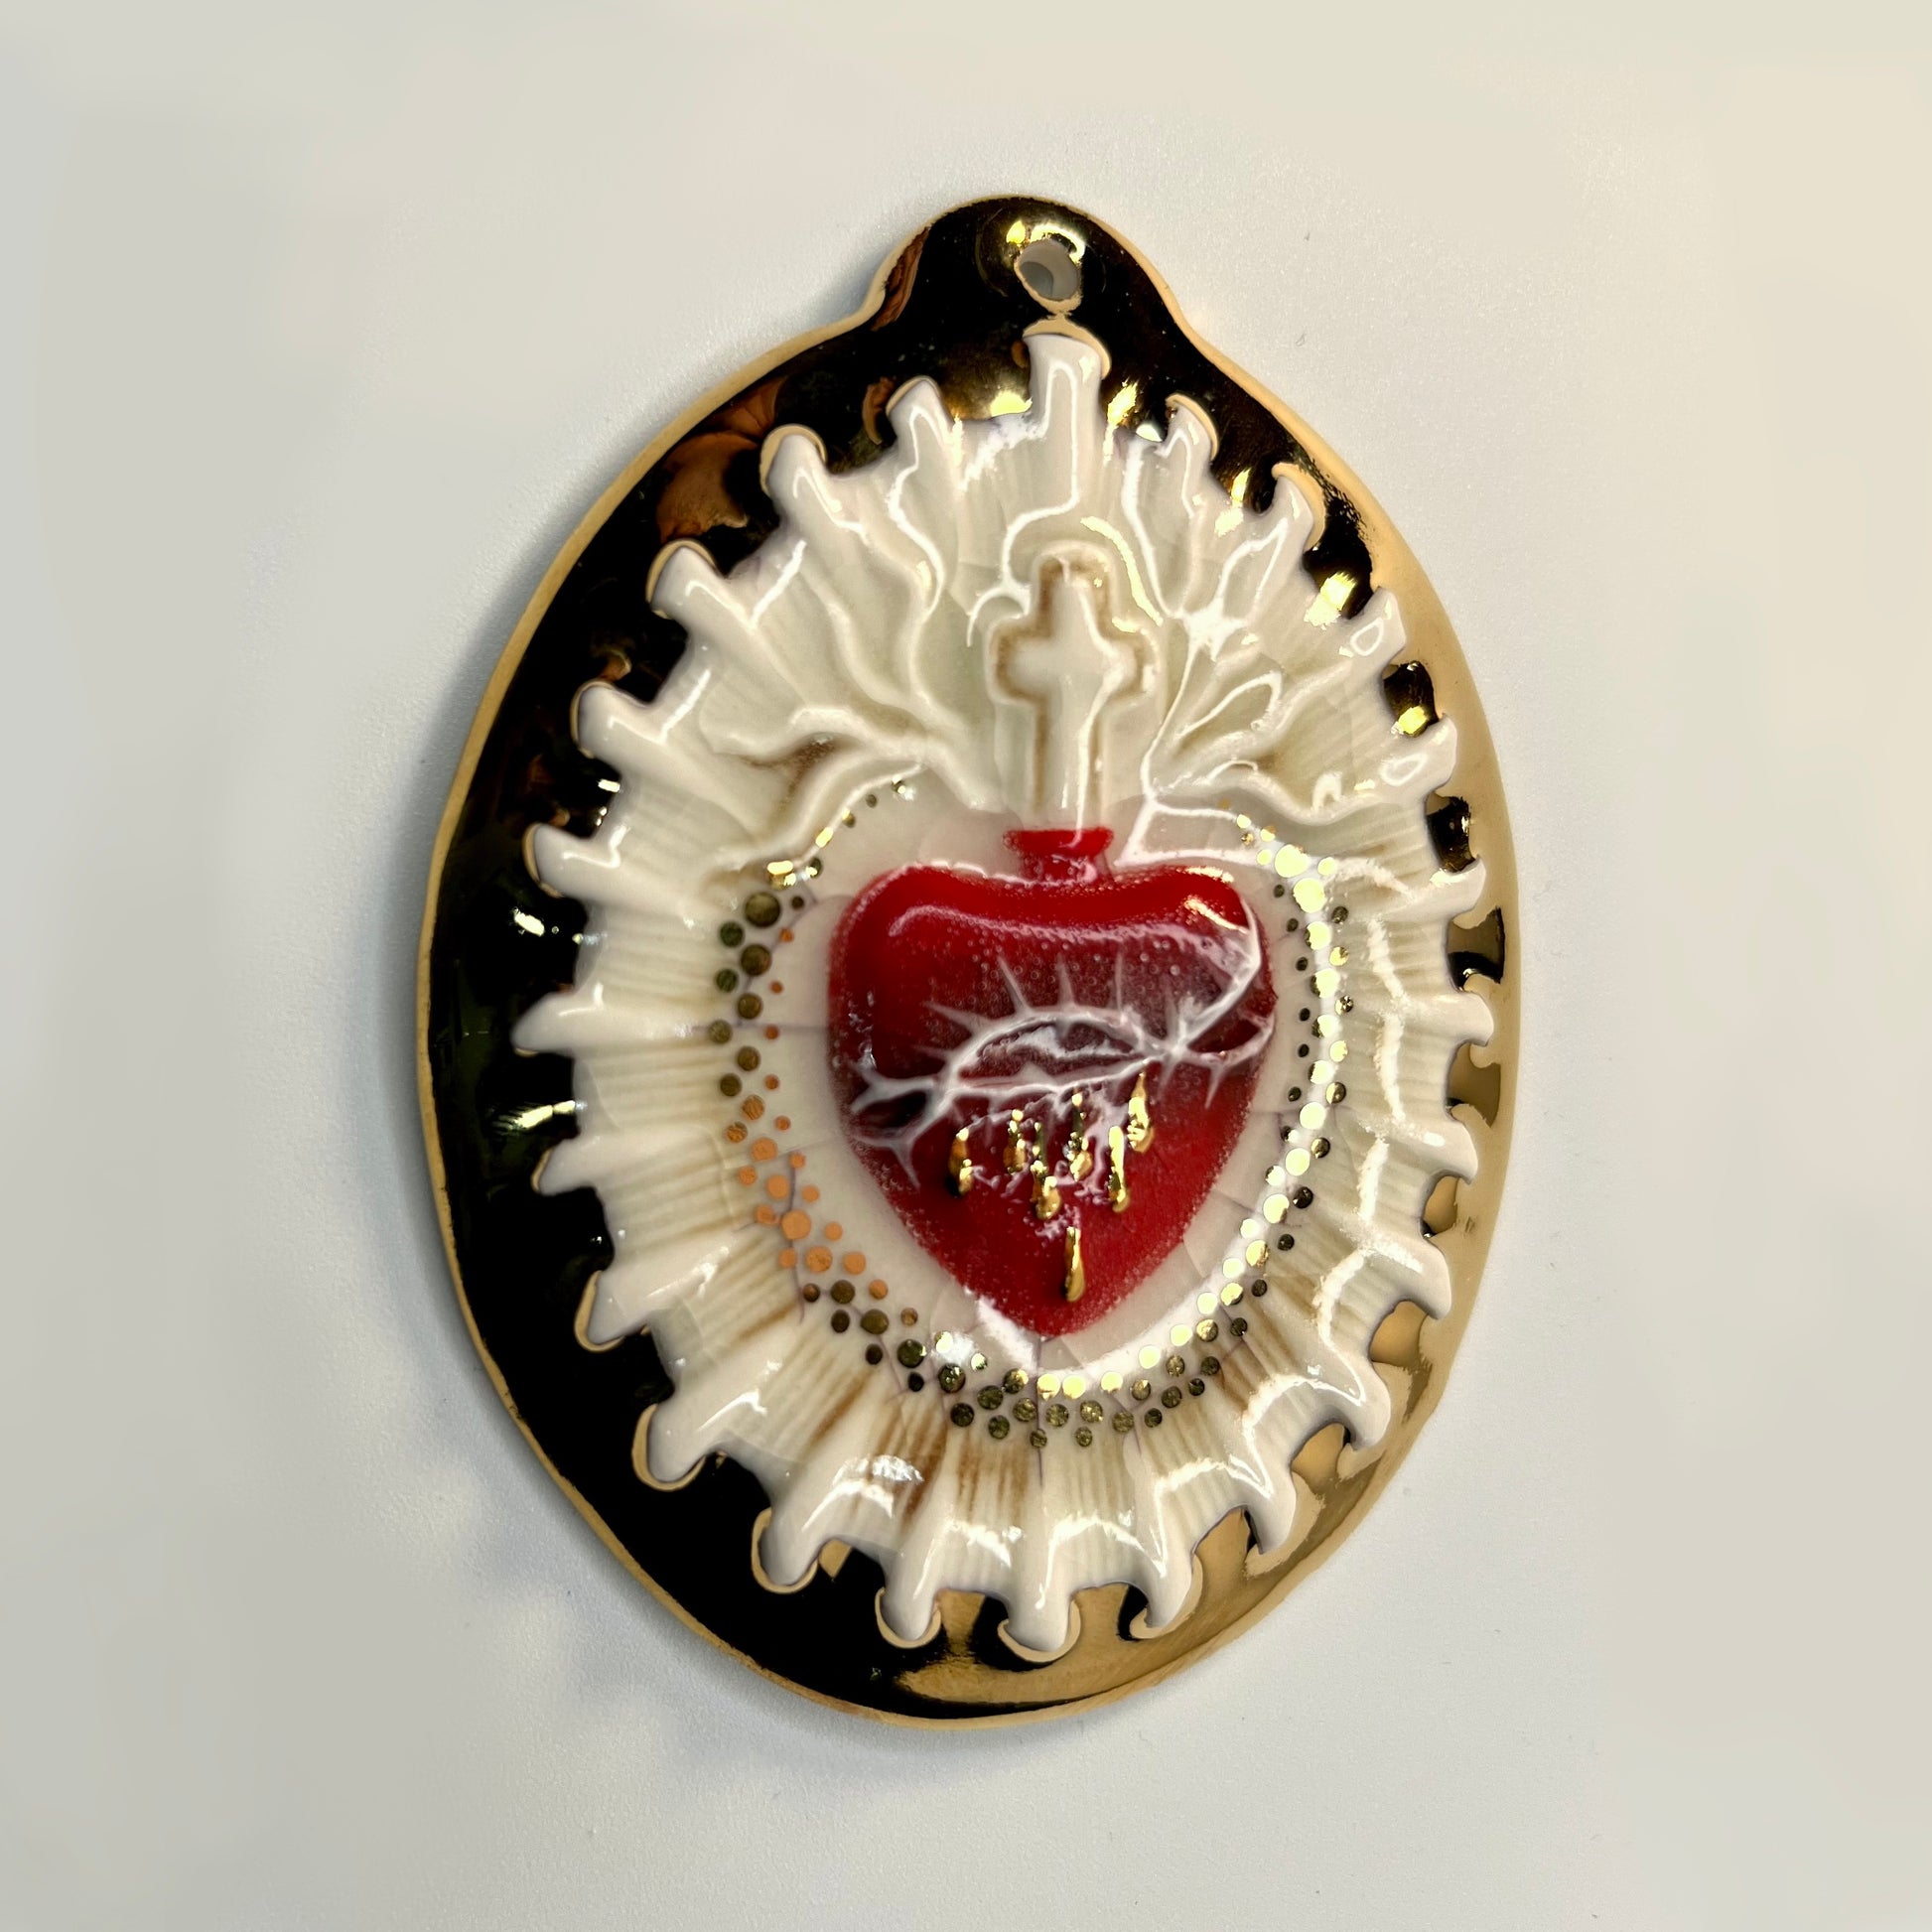 Product Image: Sacred Heart 8 - Hand crafted Porcelain Home Ornament. Red Bleeding Sacred Heart in thorns.